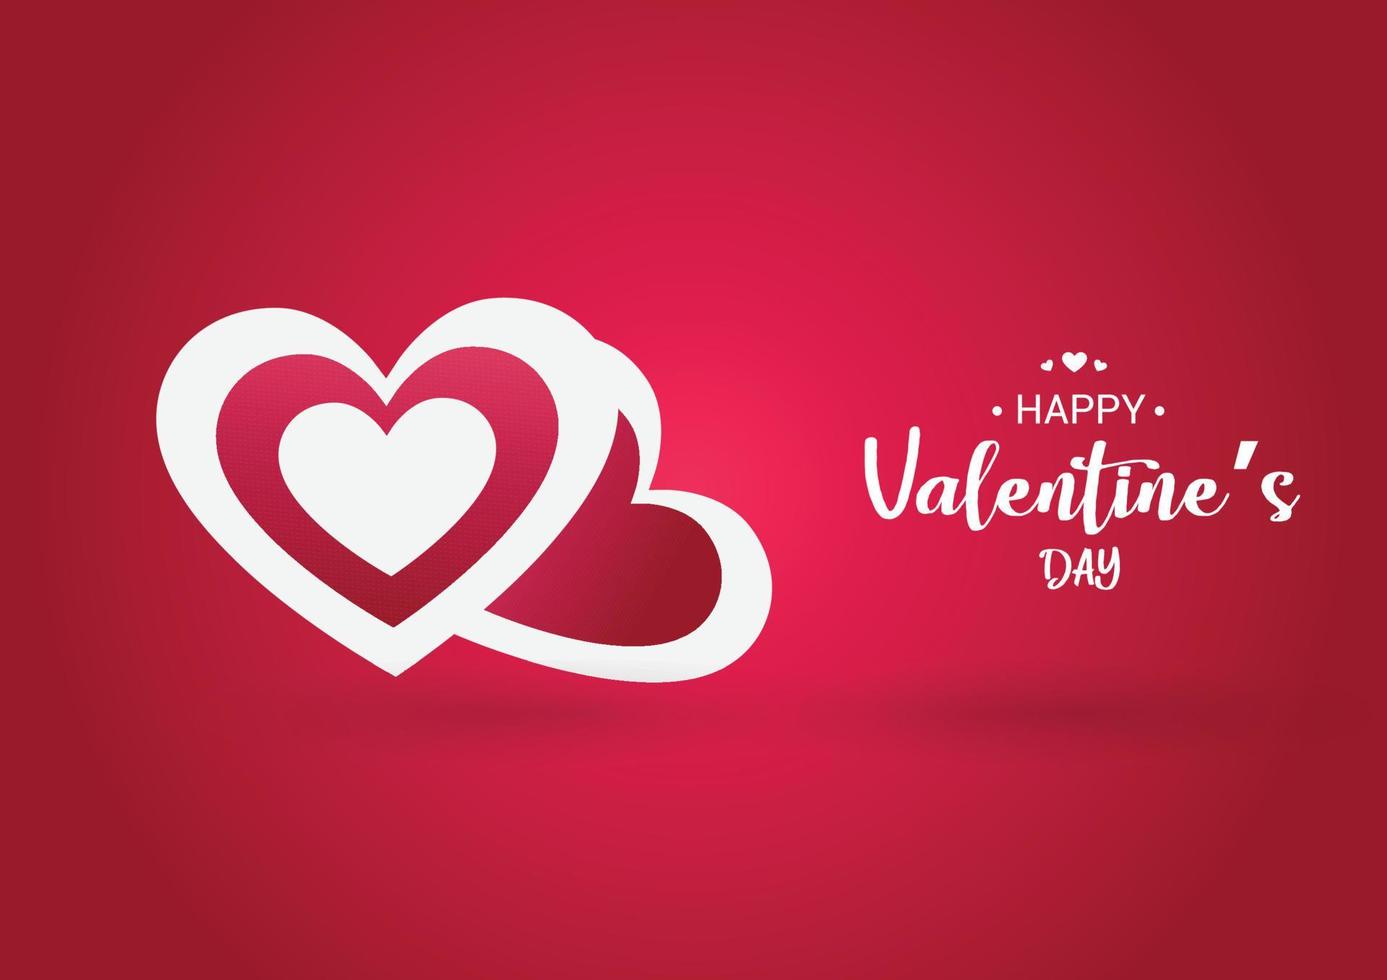 Happy valentines day card background free vector